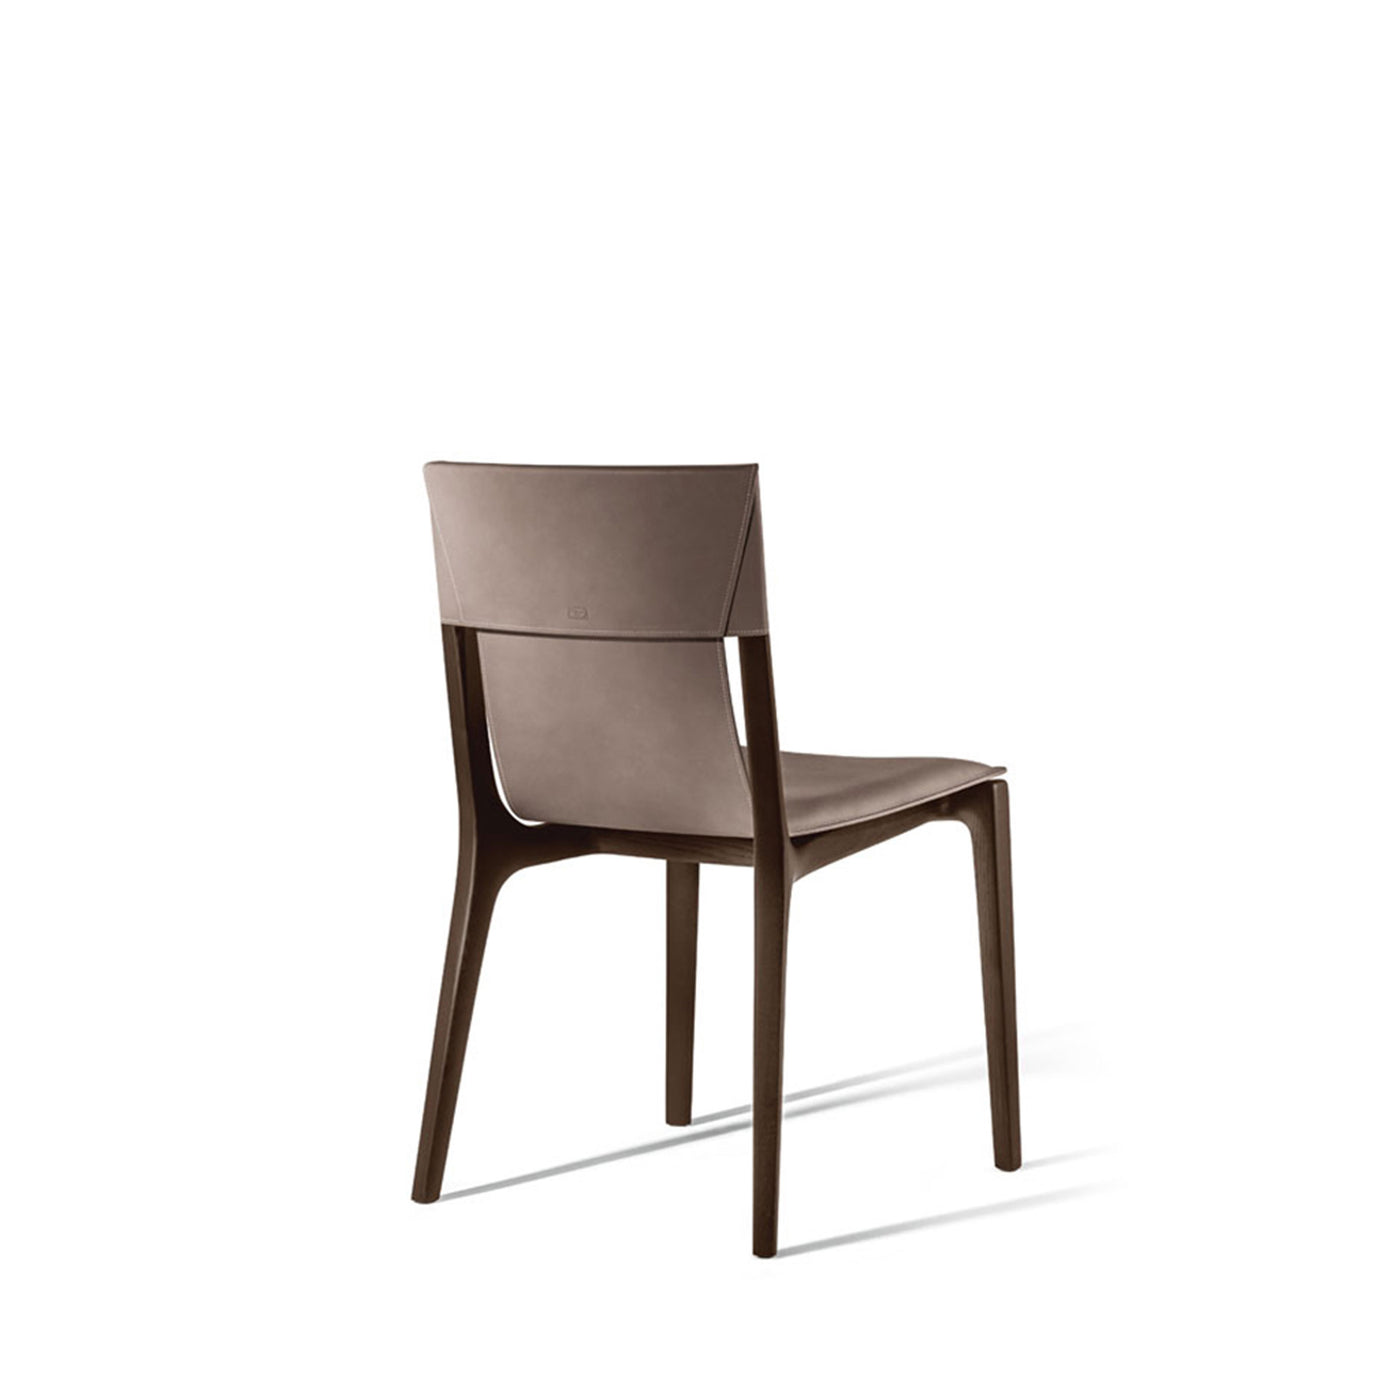 Leather Dining Chair ISADORA by Roberto Lazzeroni for Poltrona Frau 07